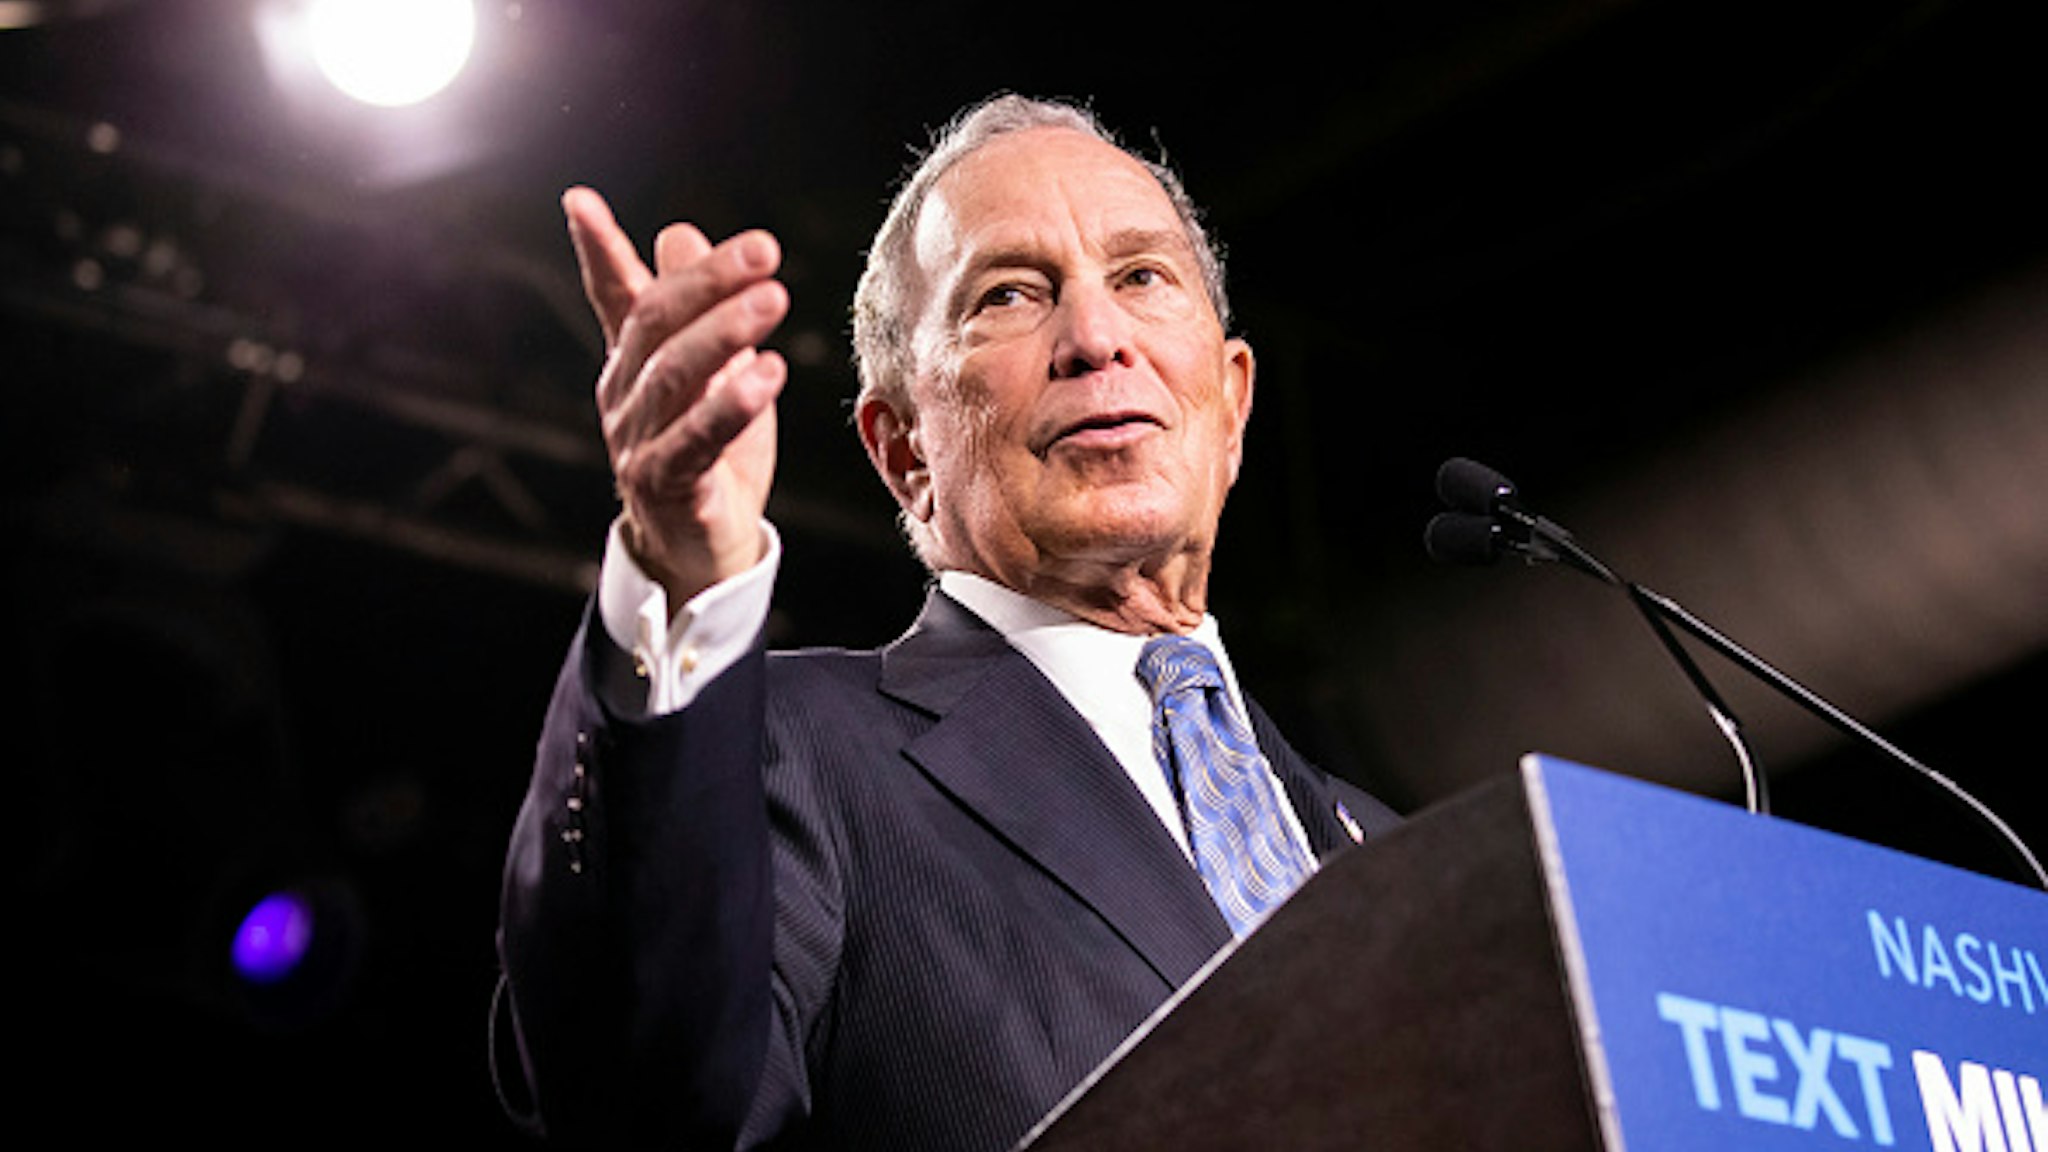 NASHVILLE, TN - FEBRUARY 12: Democratic presidential candidate former New York City Mayor Mike Bloomberg delivers remarks during a campaign rally on February 12, 2020 in Nashville, Tennessee. Bloomberg is holding the rally to mark the beginning of early voting in Tennessee ahead of the Super Tuesday primary on March 3rd.